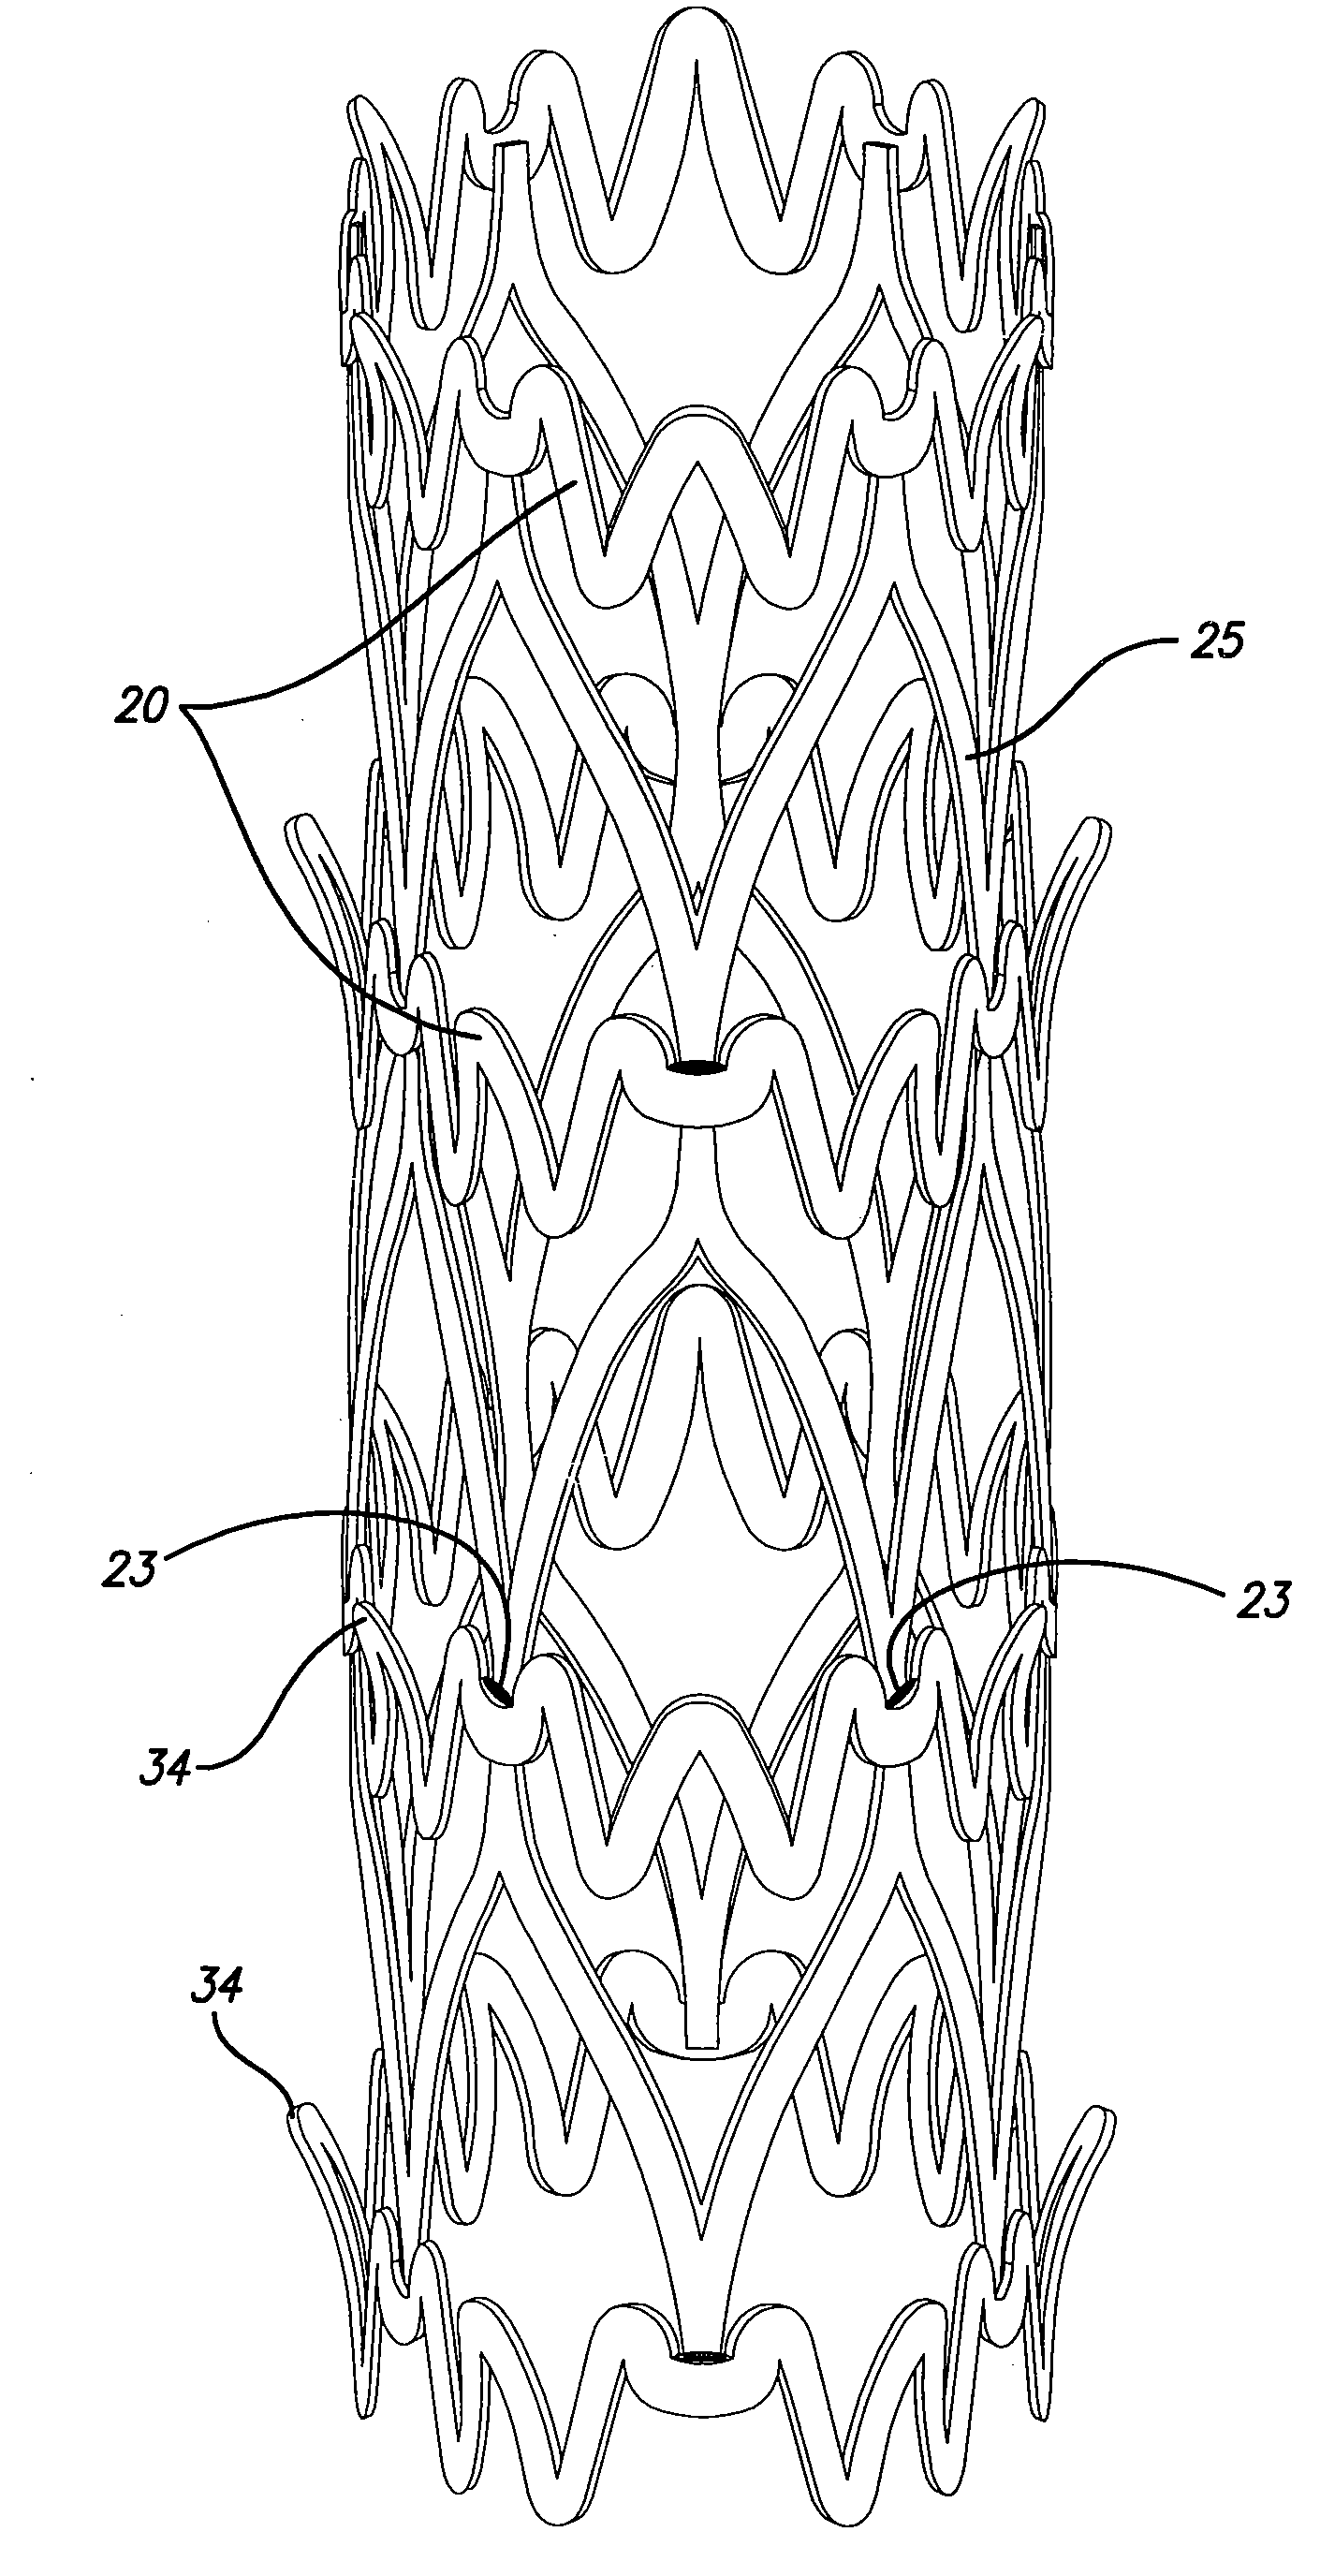 Hybrid stent and method of making